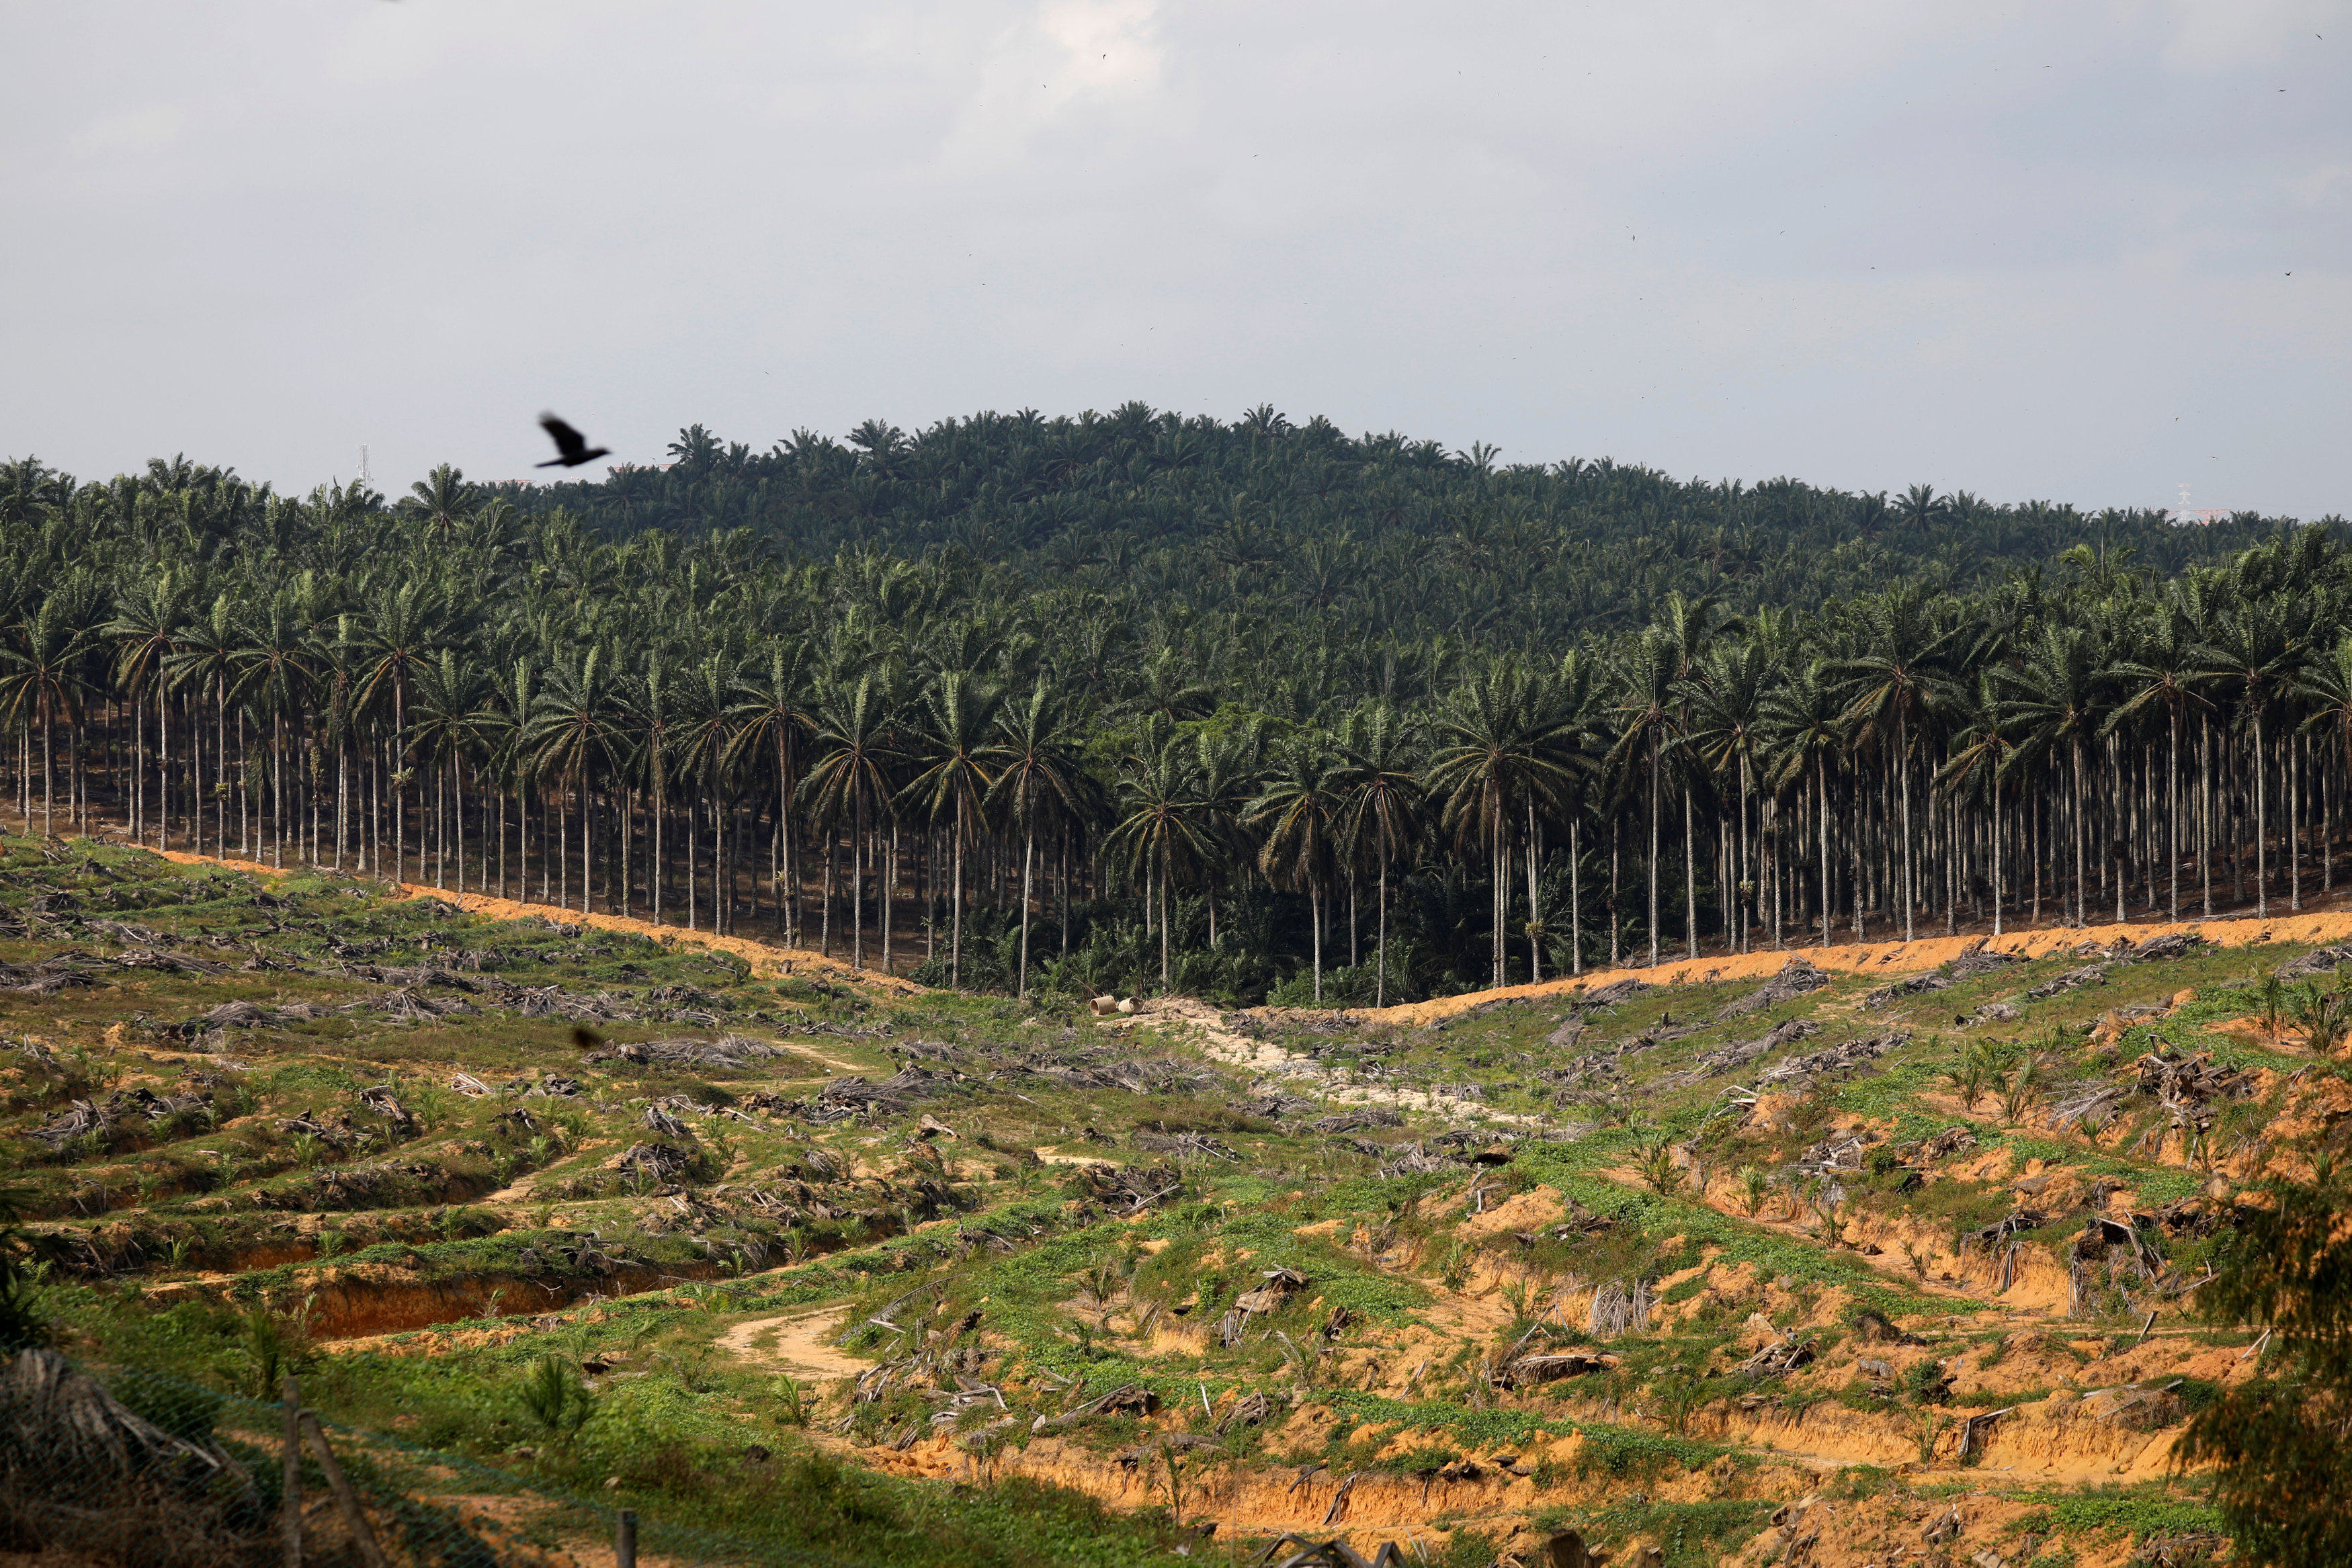 Land being cleared for an oil palm plantation in southern Malaysia’s Johor state on February 26, 2019. Photo: Reuters